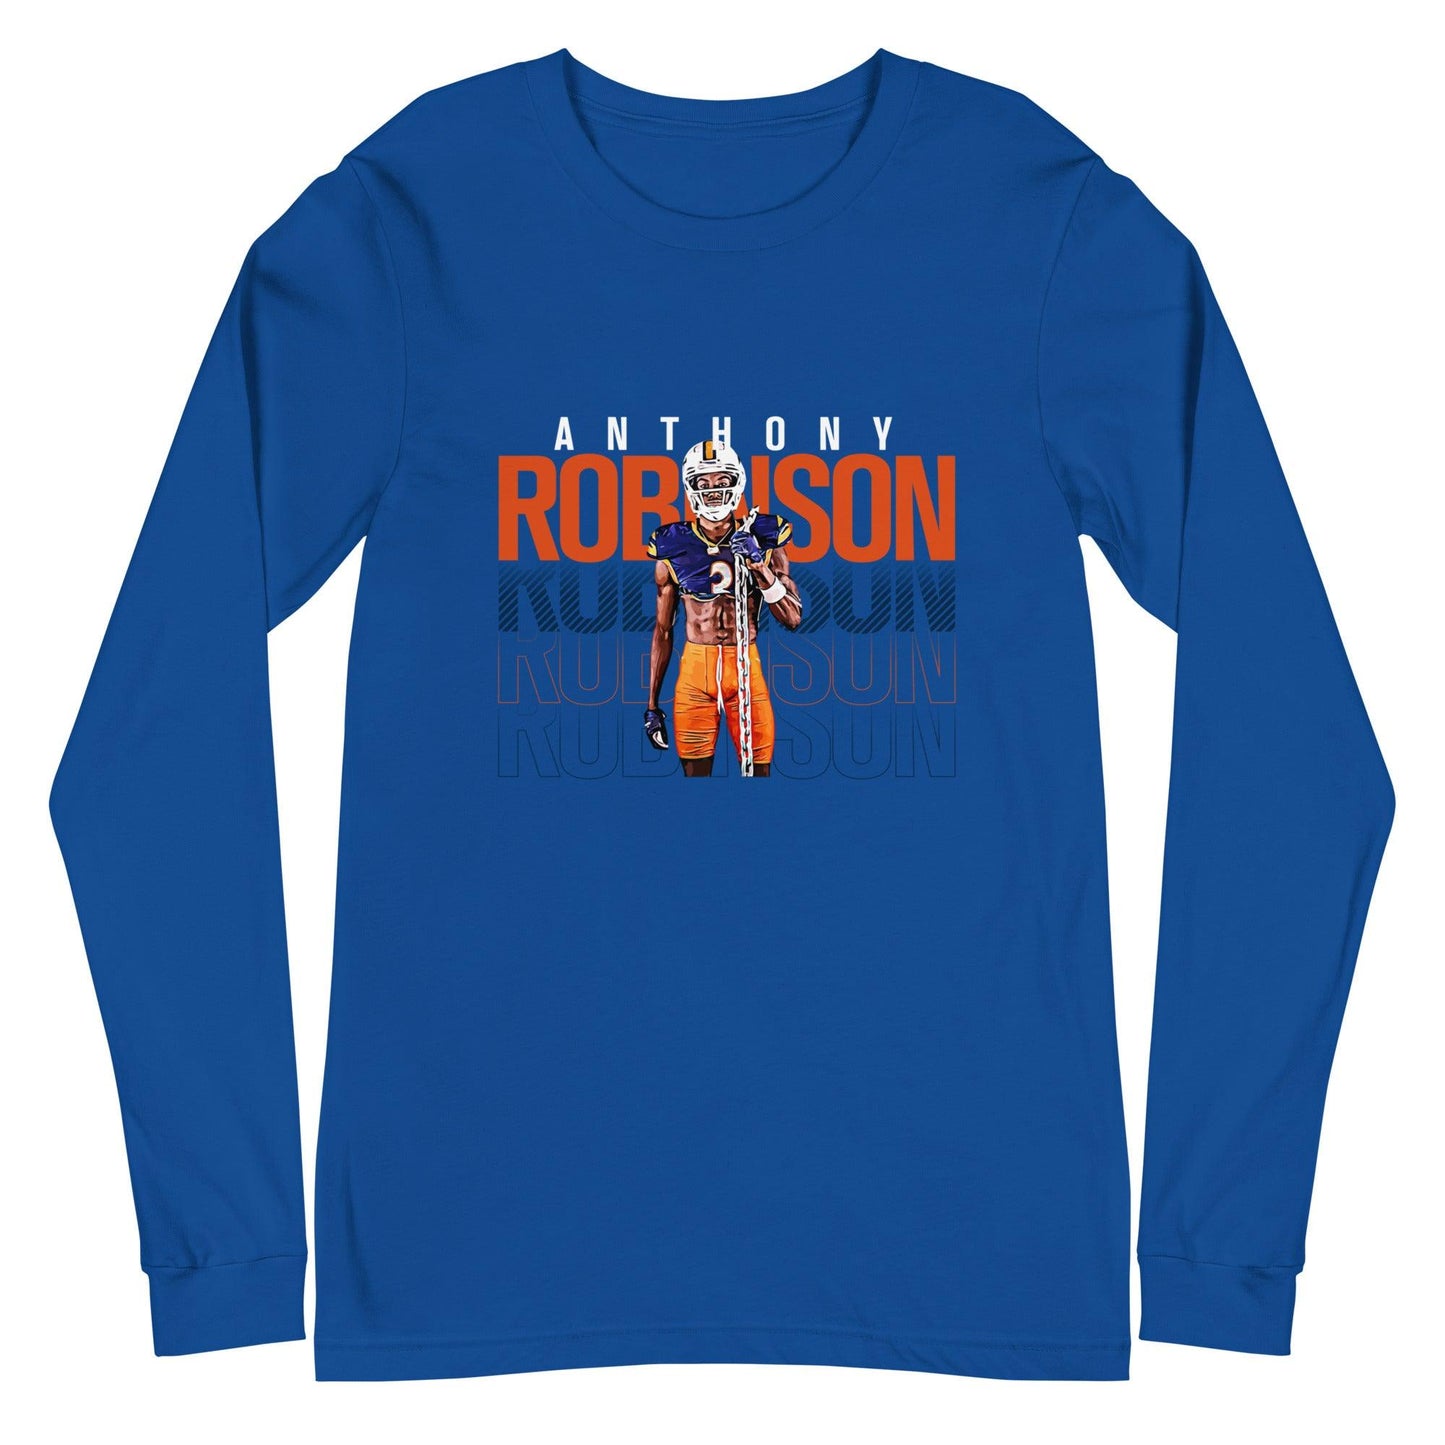 Anthony Robinson "Gameday" Long Sleeve Tee - Fan Arch